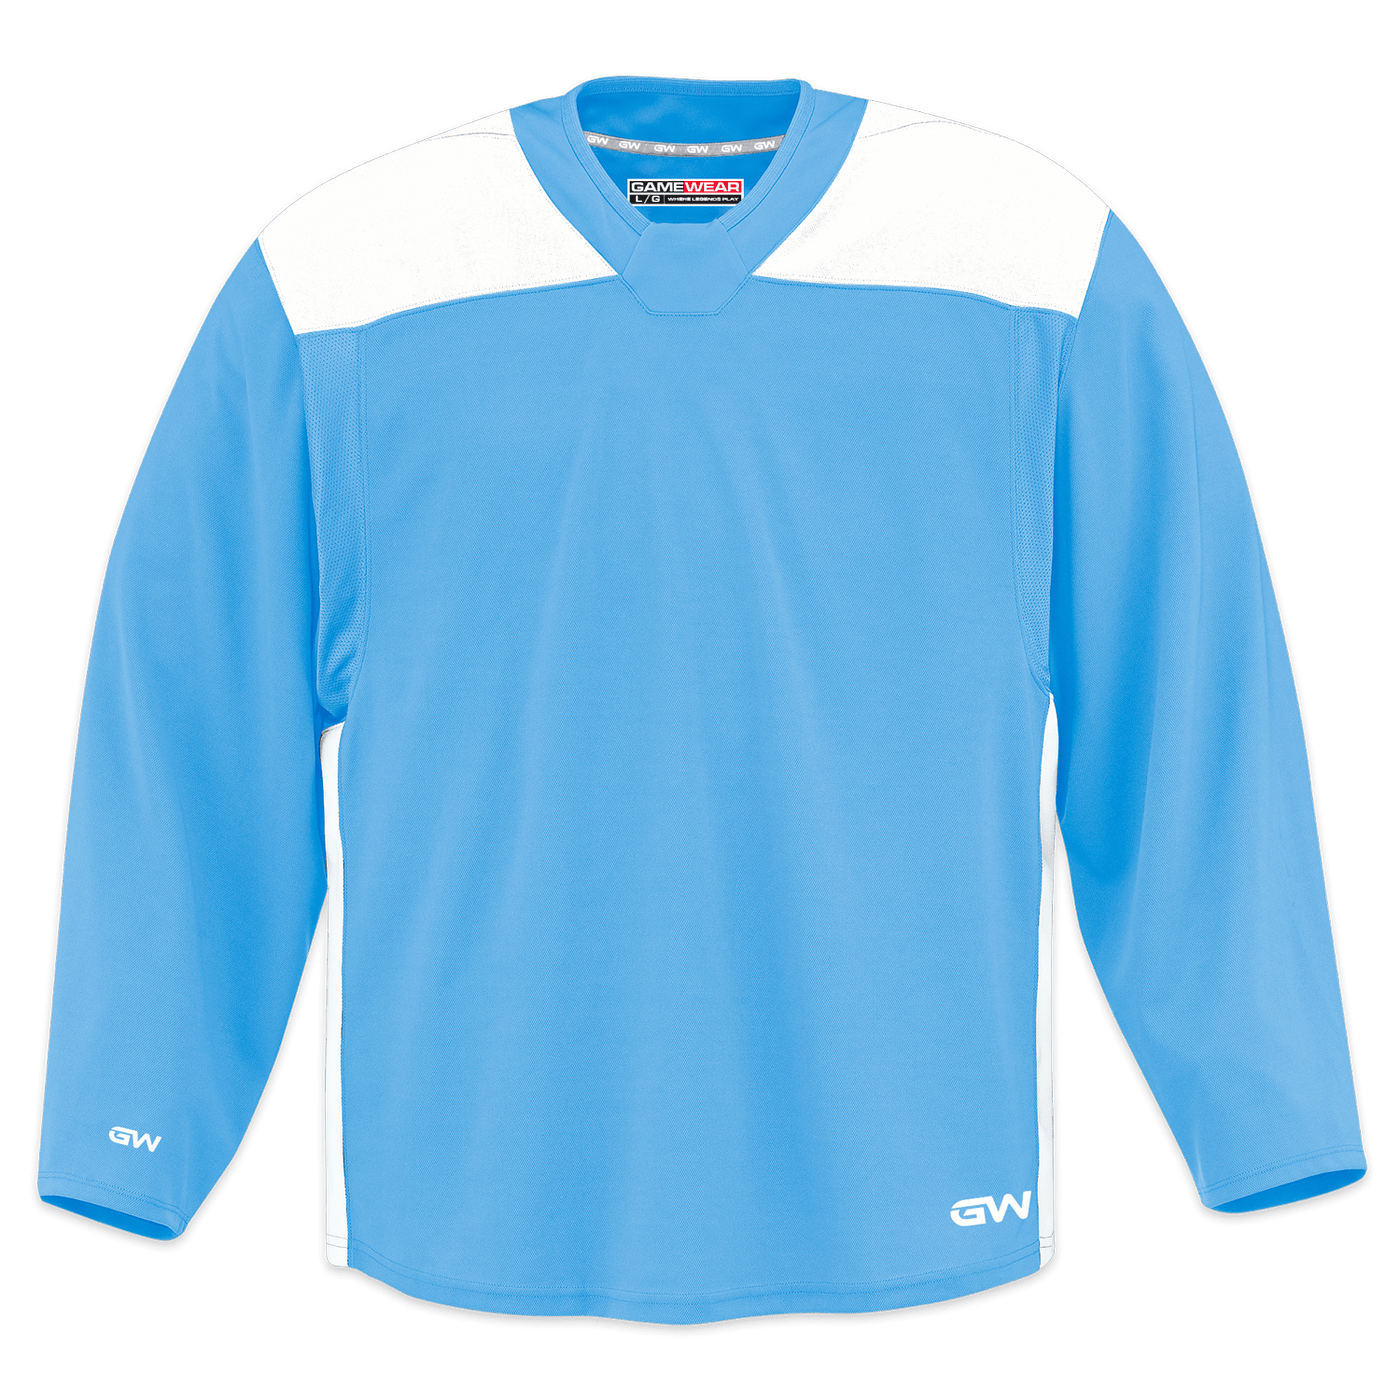 GameWear GW6500 ProLite Series Junior Hockey Practice Jersey - Sky Blue / White - The Hockey Shop Source For Sports